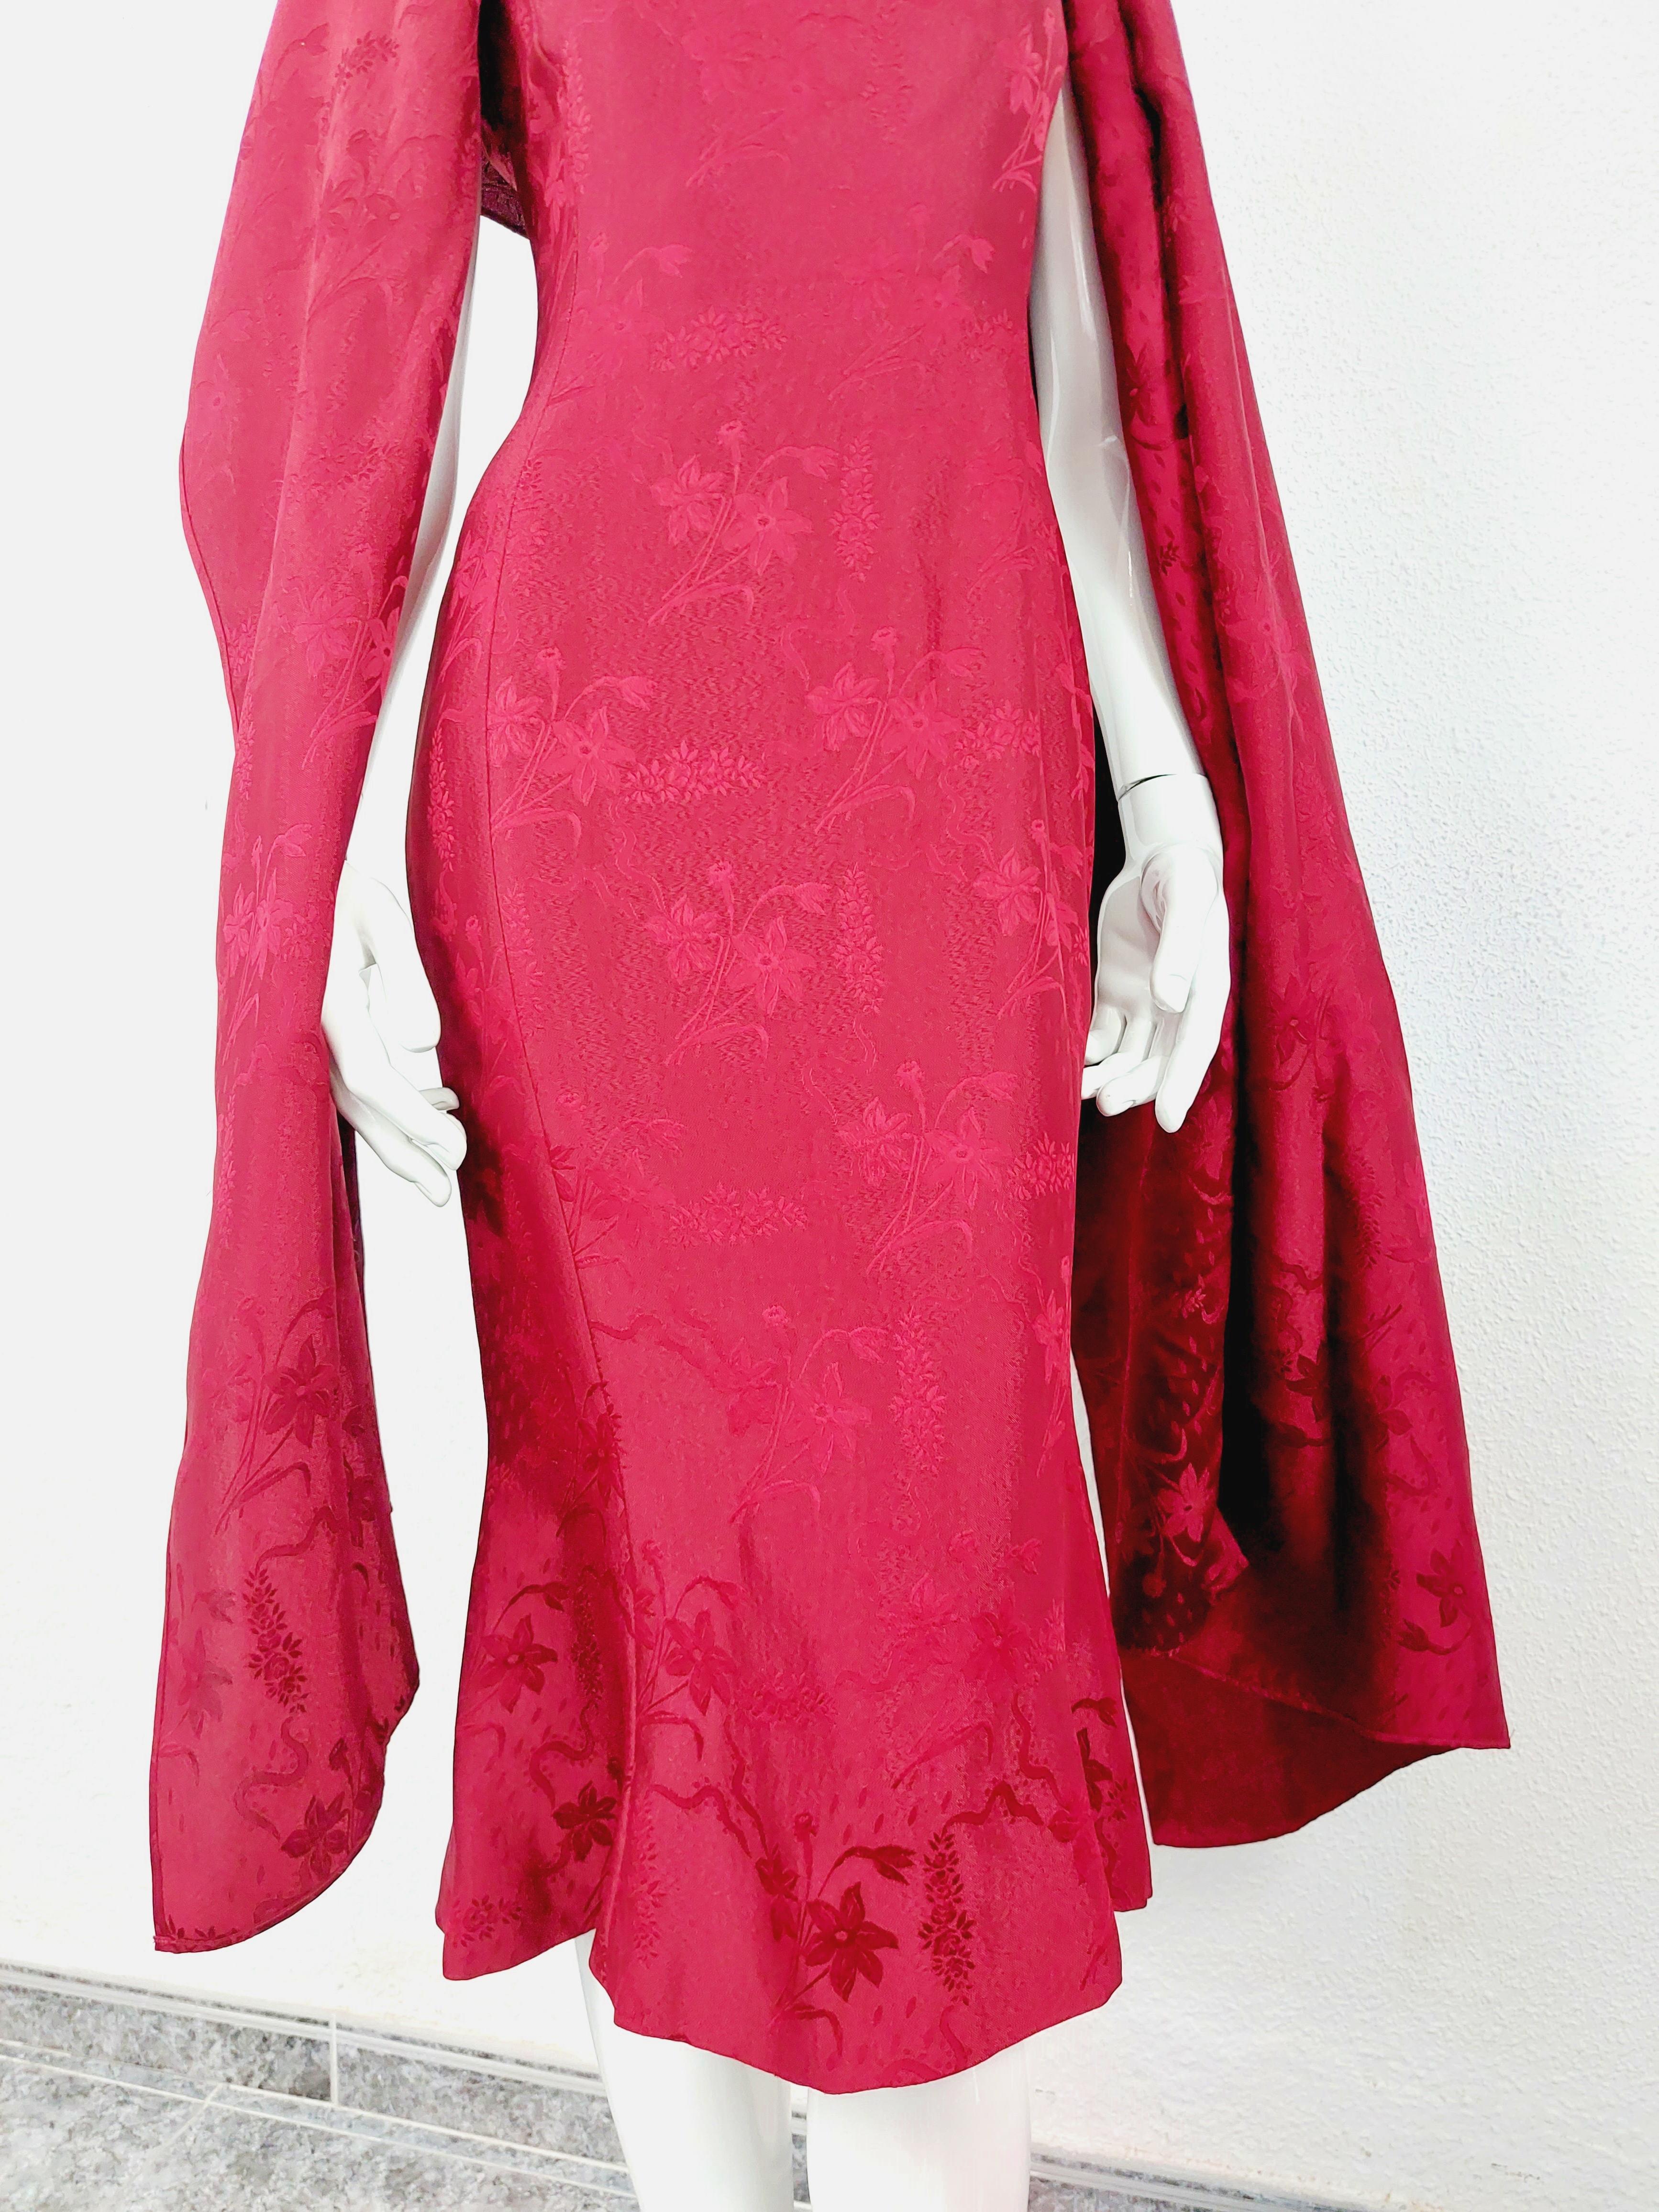 John Galliano London Red Silk Brocade Floral Runway Evening Gown Dress w Stola For Sale 11